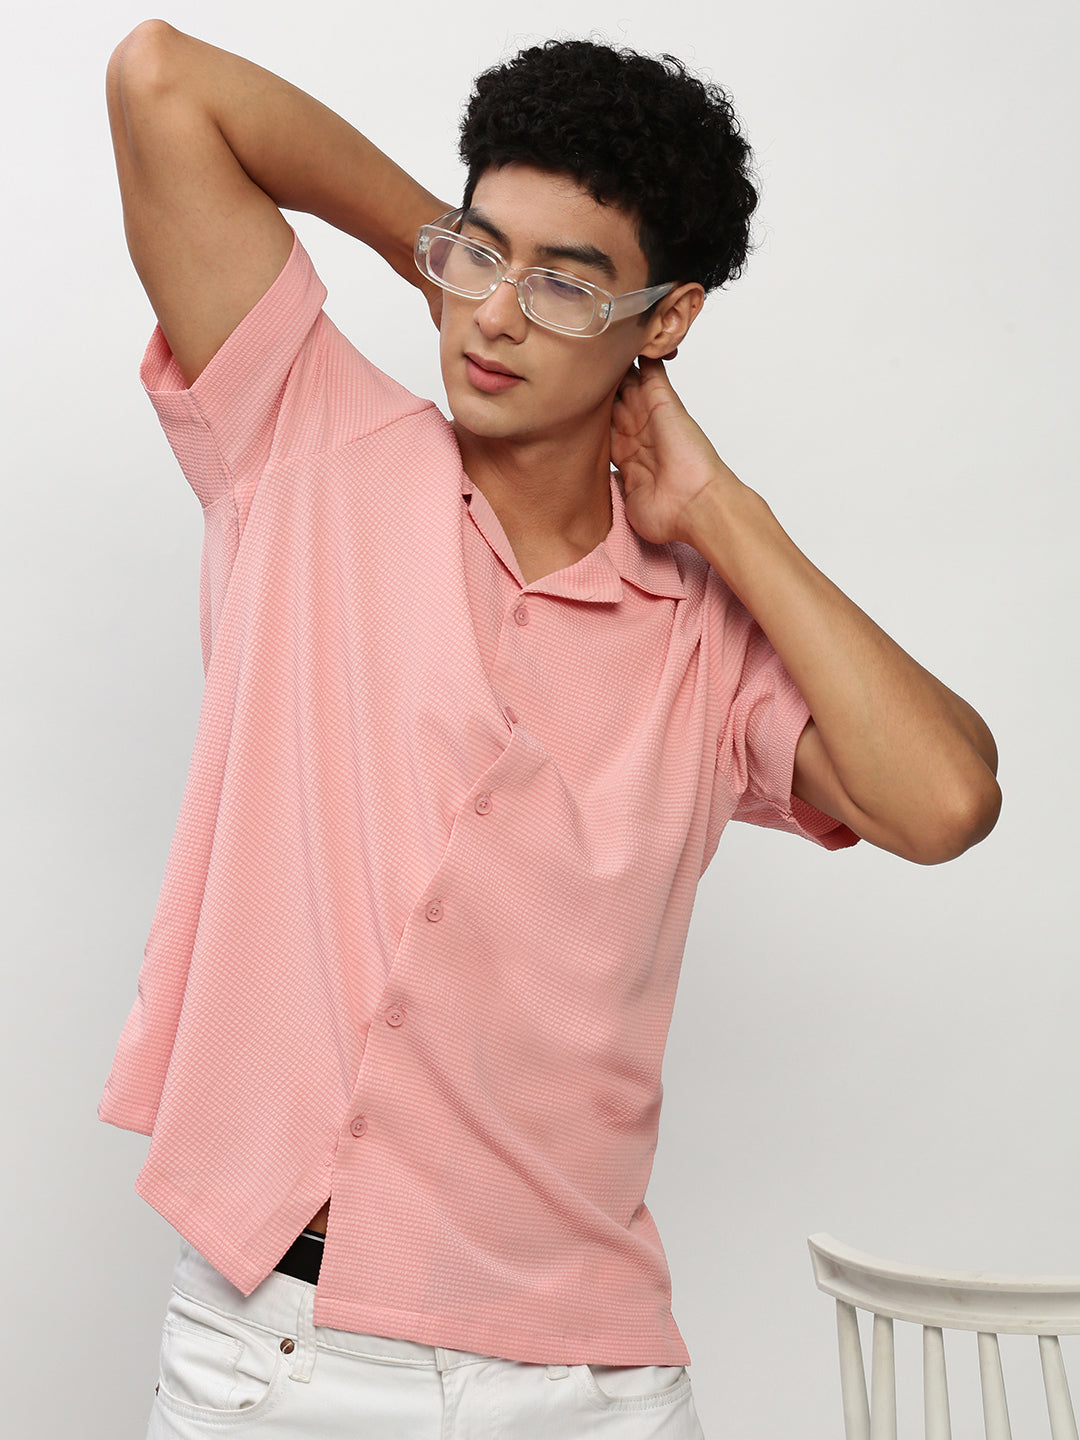 Men Peach Solid Casual Casual Shirts